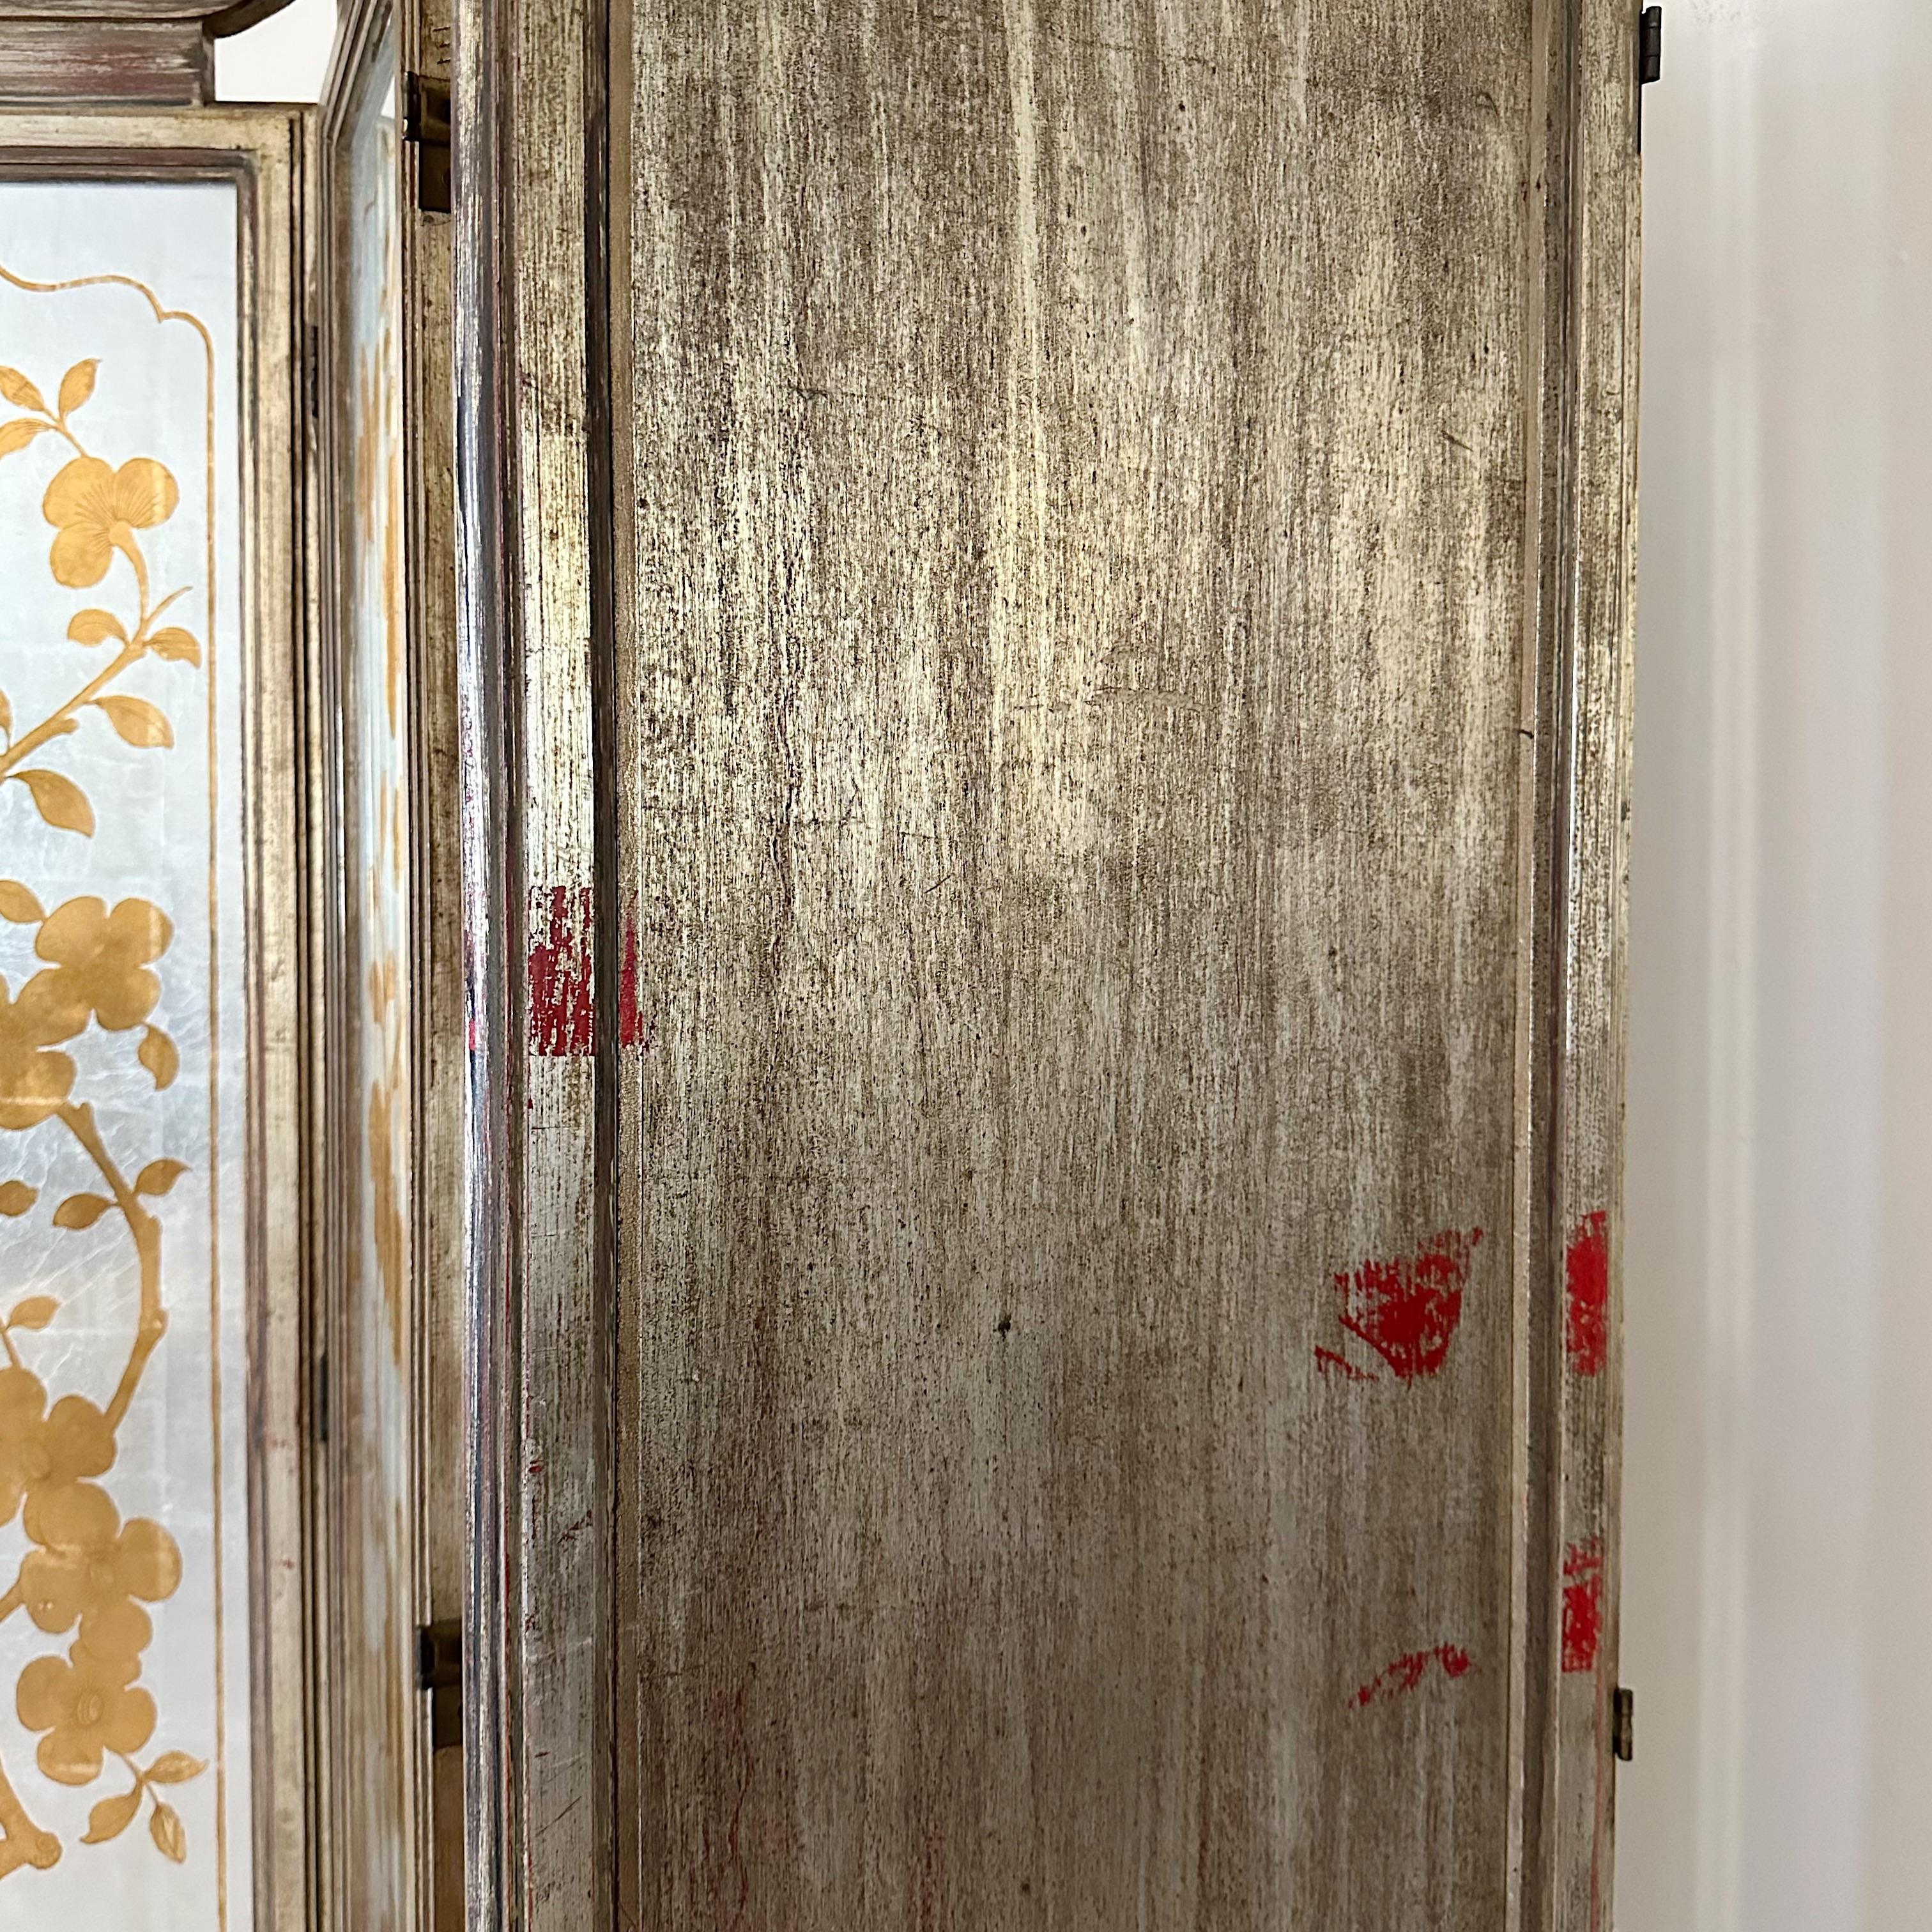 Glass Stunning James Mont Five-Panel Eglomise Room Divider Screen From the 1950s For Sale